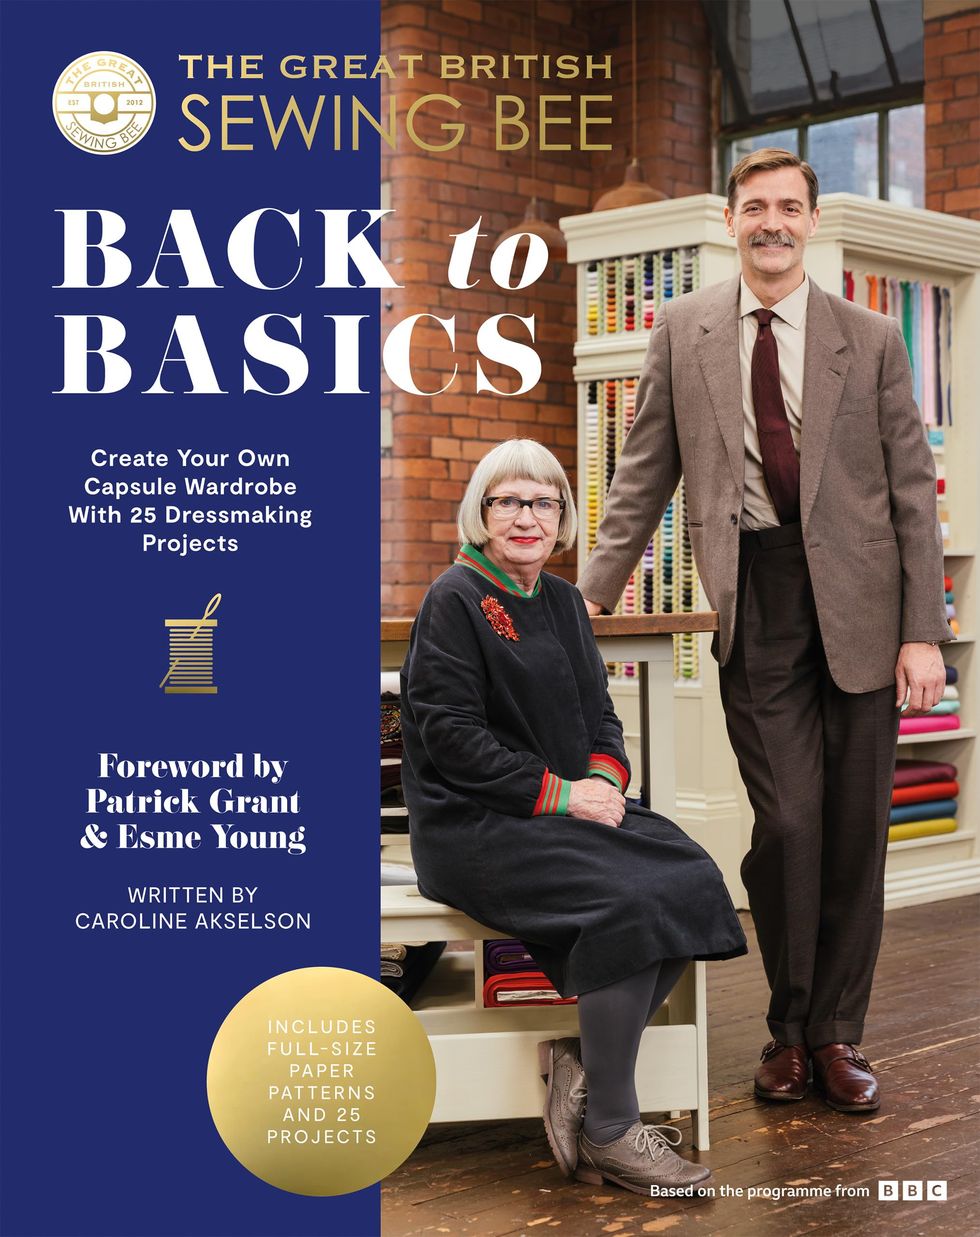 Great British Sewing Bee: Back to Basics book is out now